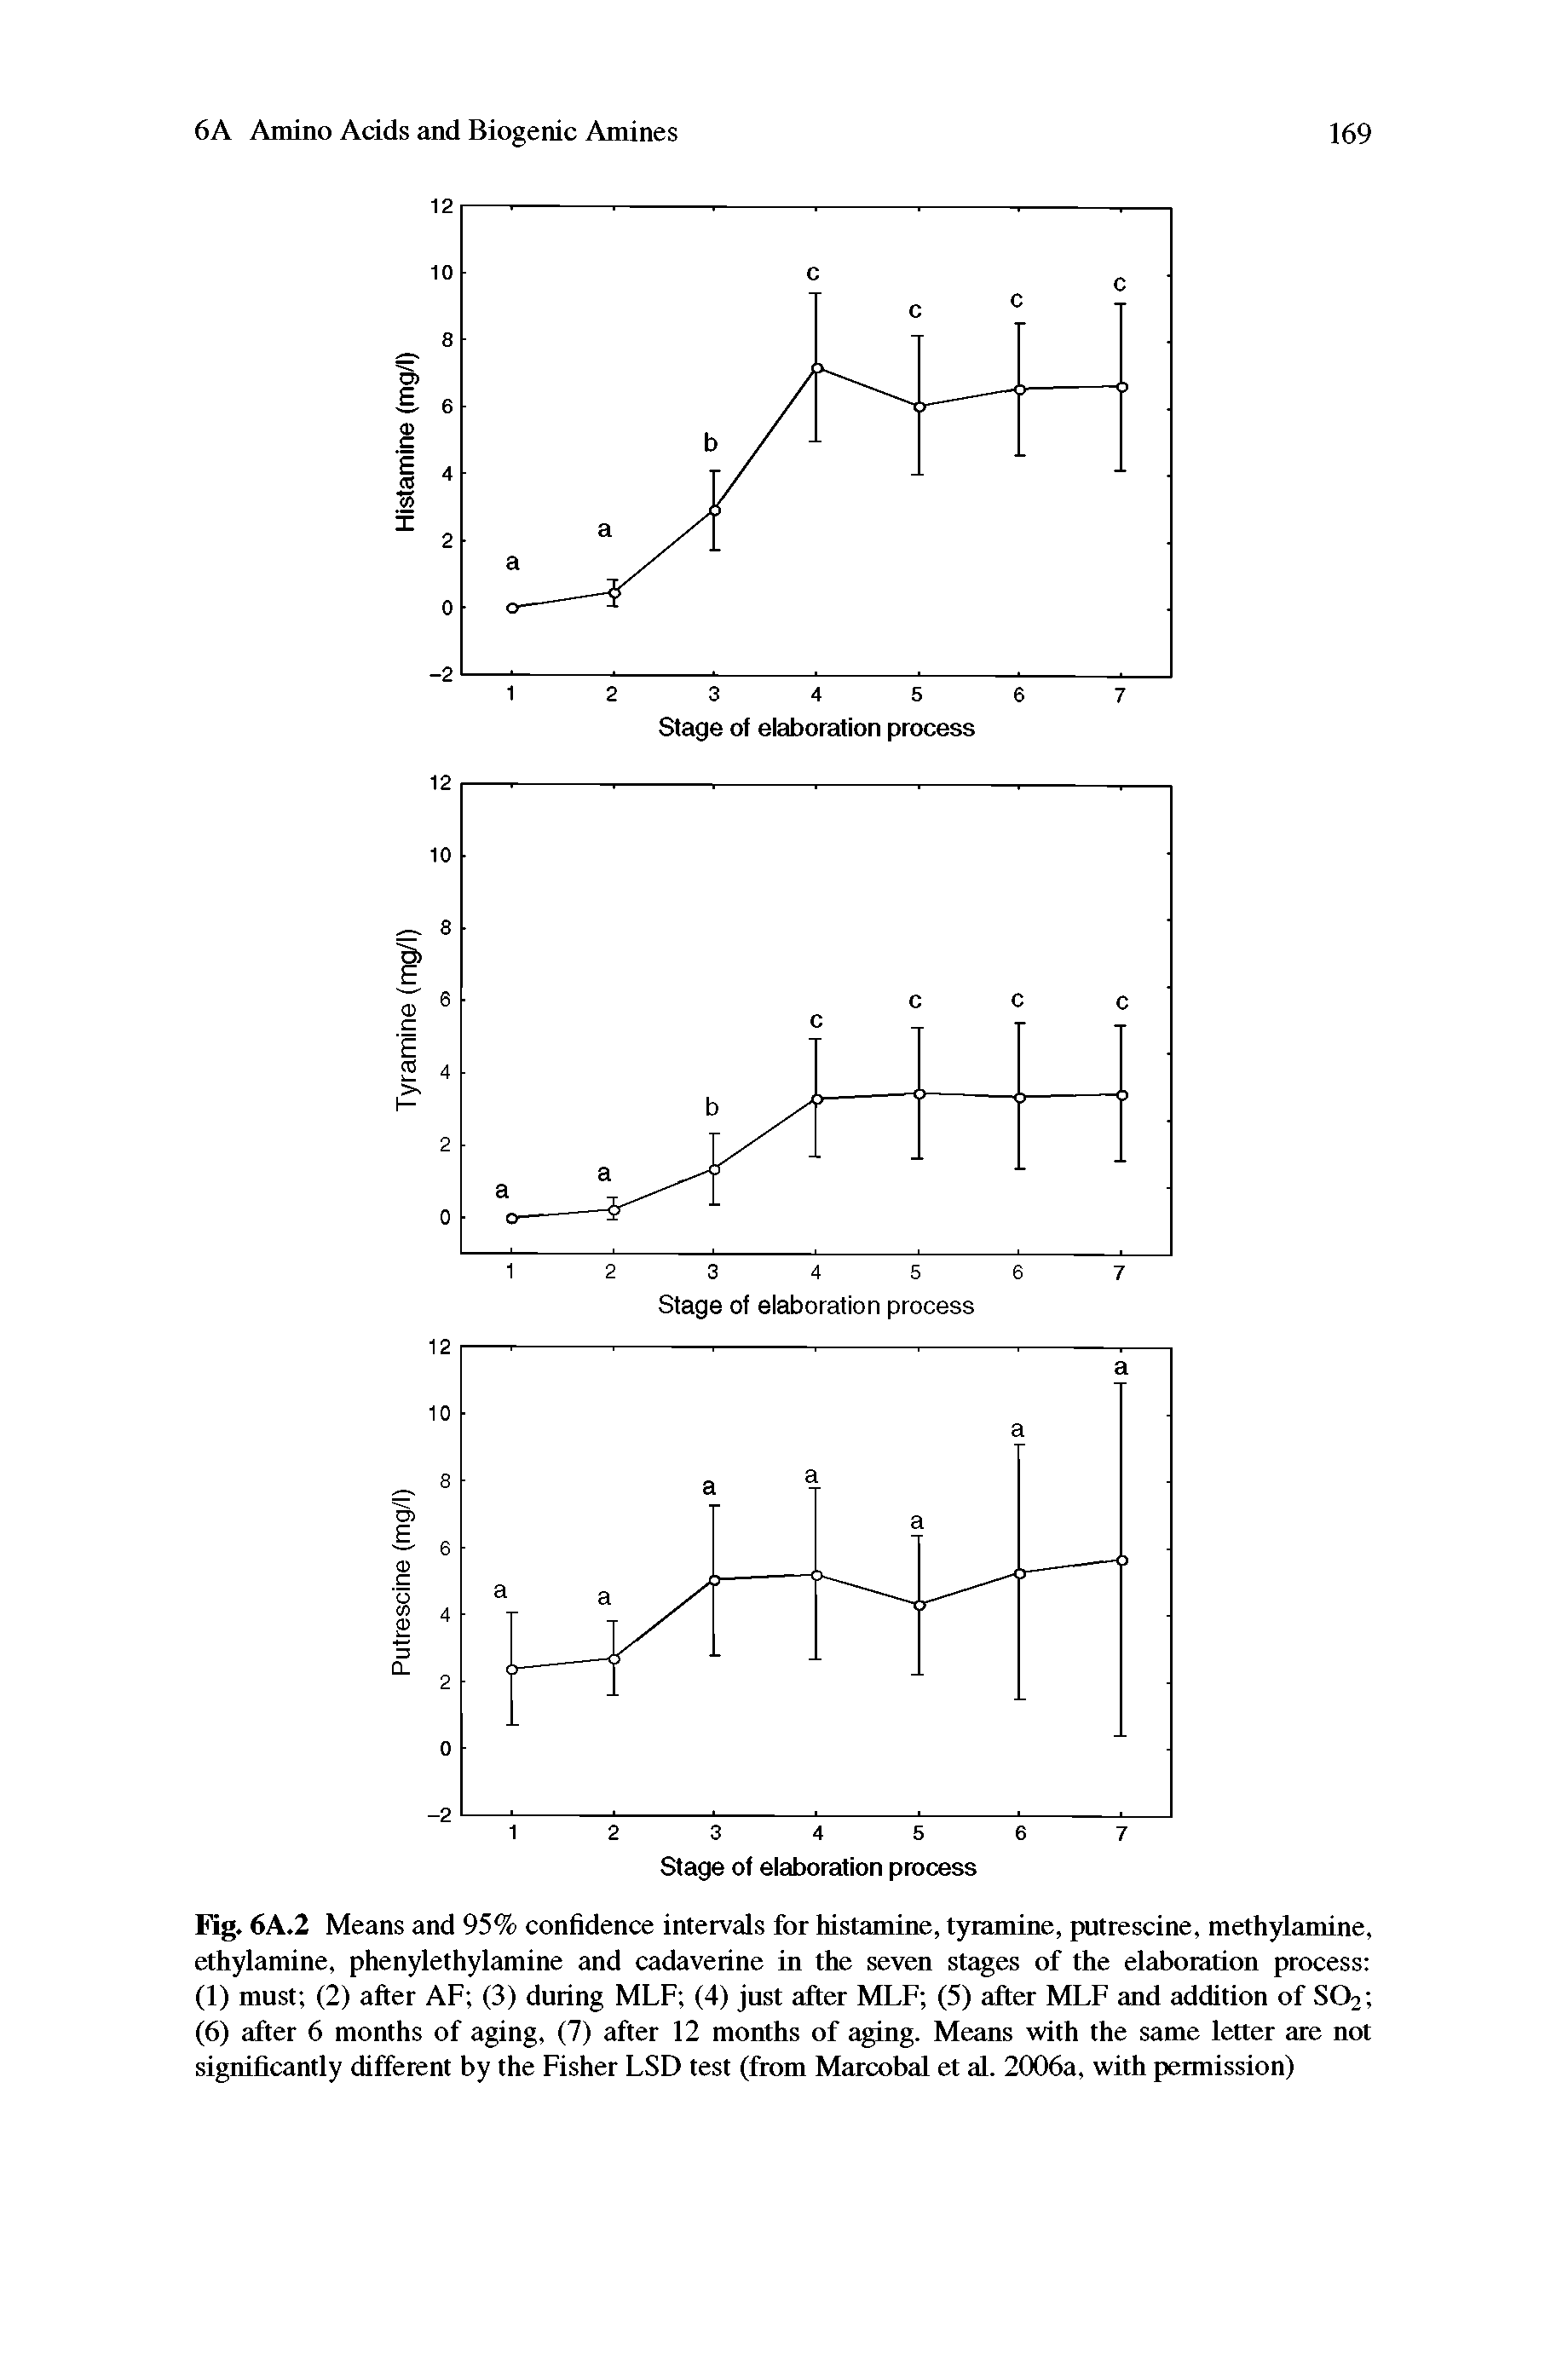 Fig. 6A.2 Means and 95% confidence intervals for histamine, tyramine, putrescine, methylamine, ethylamine, phenylethylamine and cadaveiine in the seven stages of the elaboration process (1) must (2) after AF (3) during MLF (4) just after MLF (5) after MLF and addition of SO2 (6) after 6 months of aging, (7) after 12 months of aging. Means with the same letter are not significantly different by the Fisher LSD test (from Marcobal et al. 2006a, with permission)...